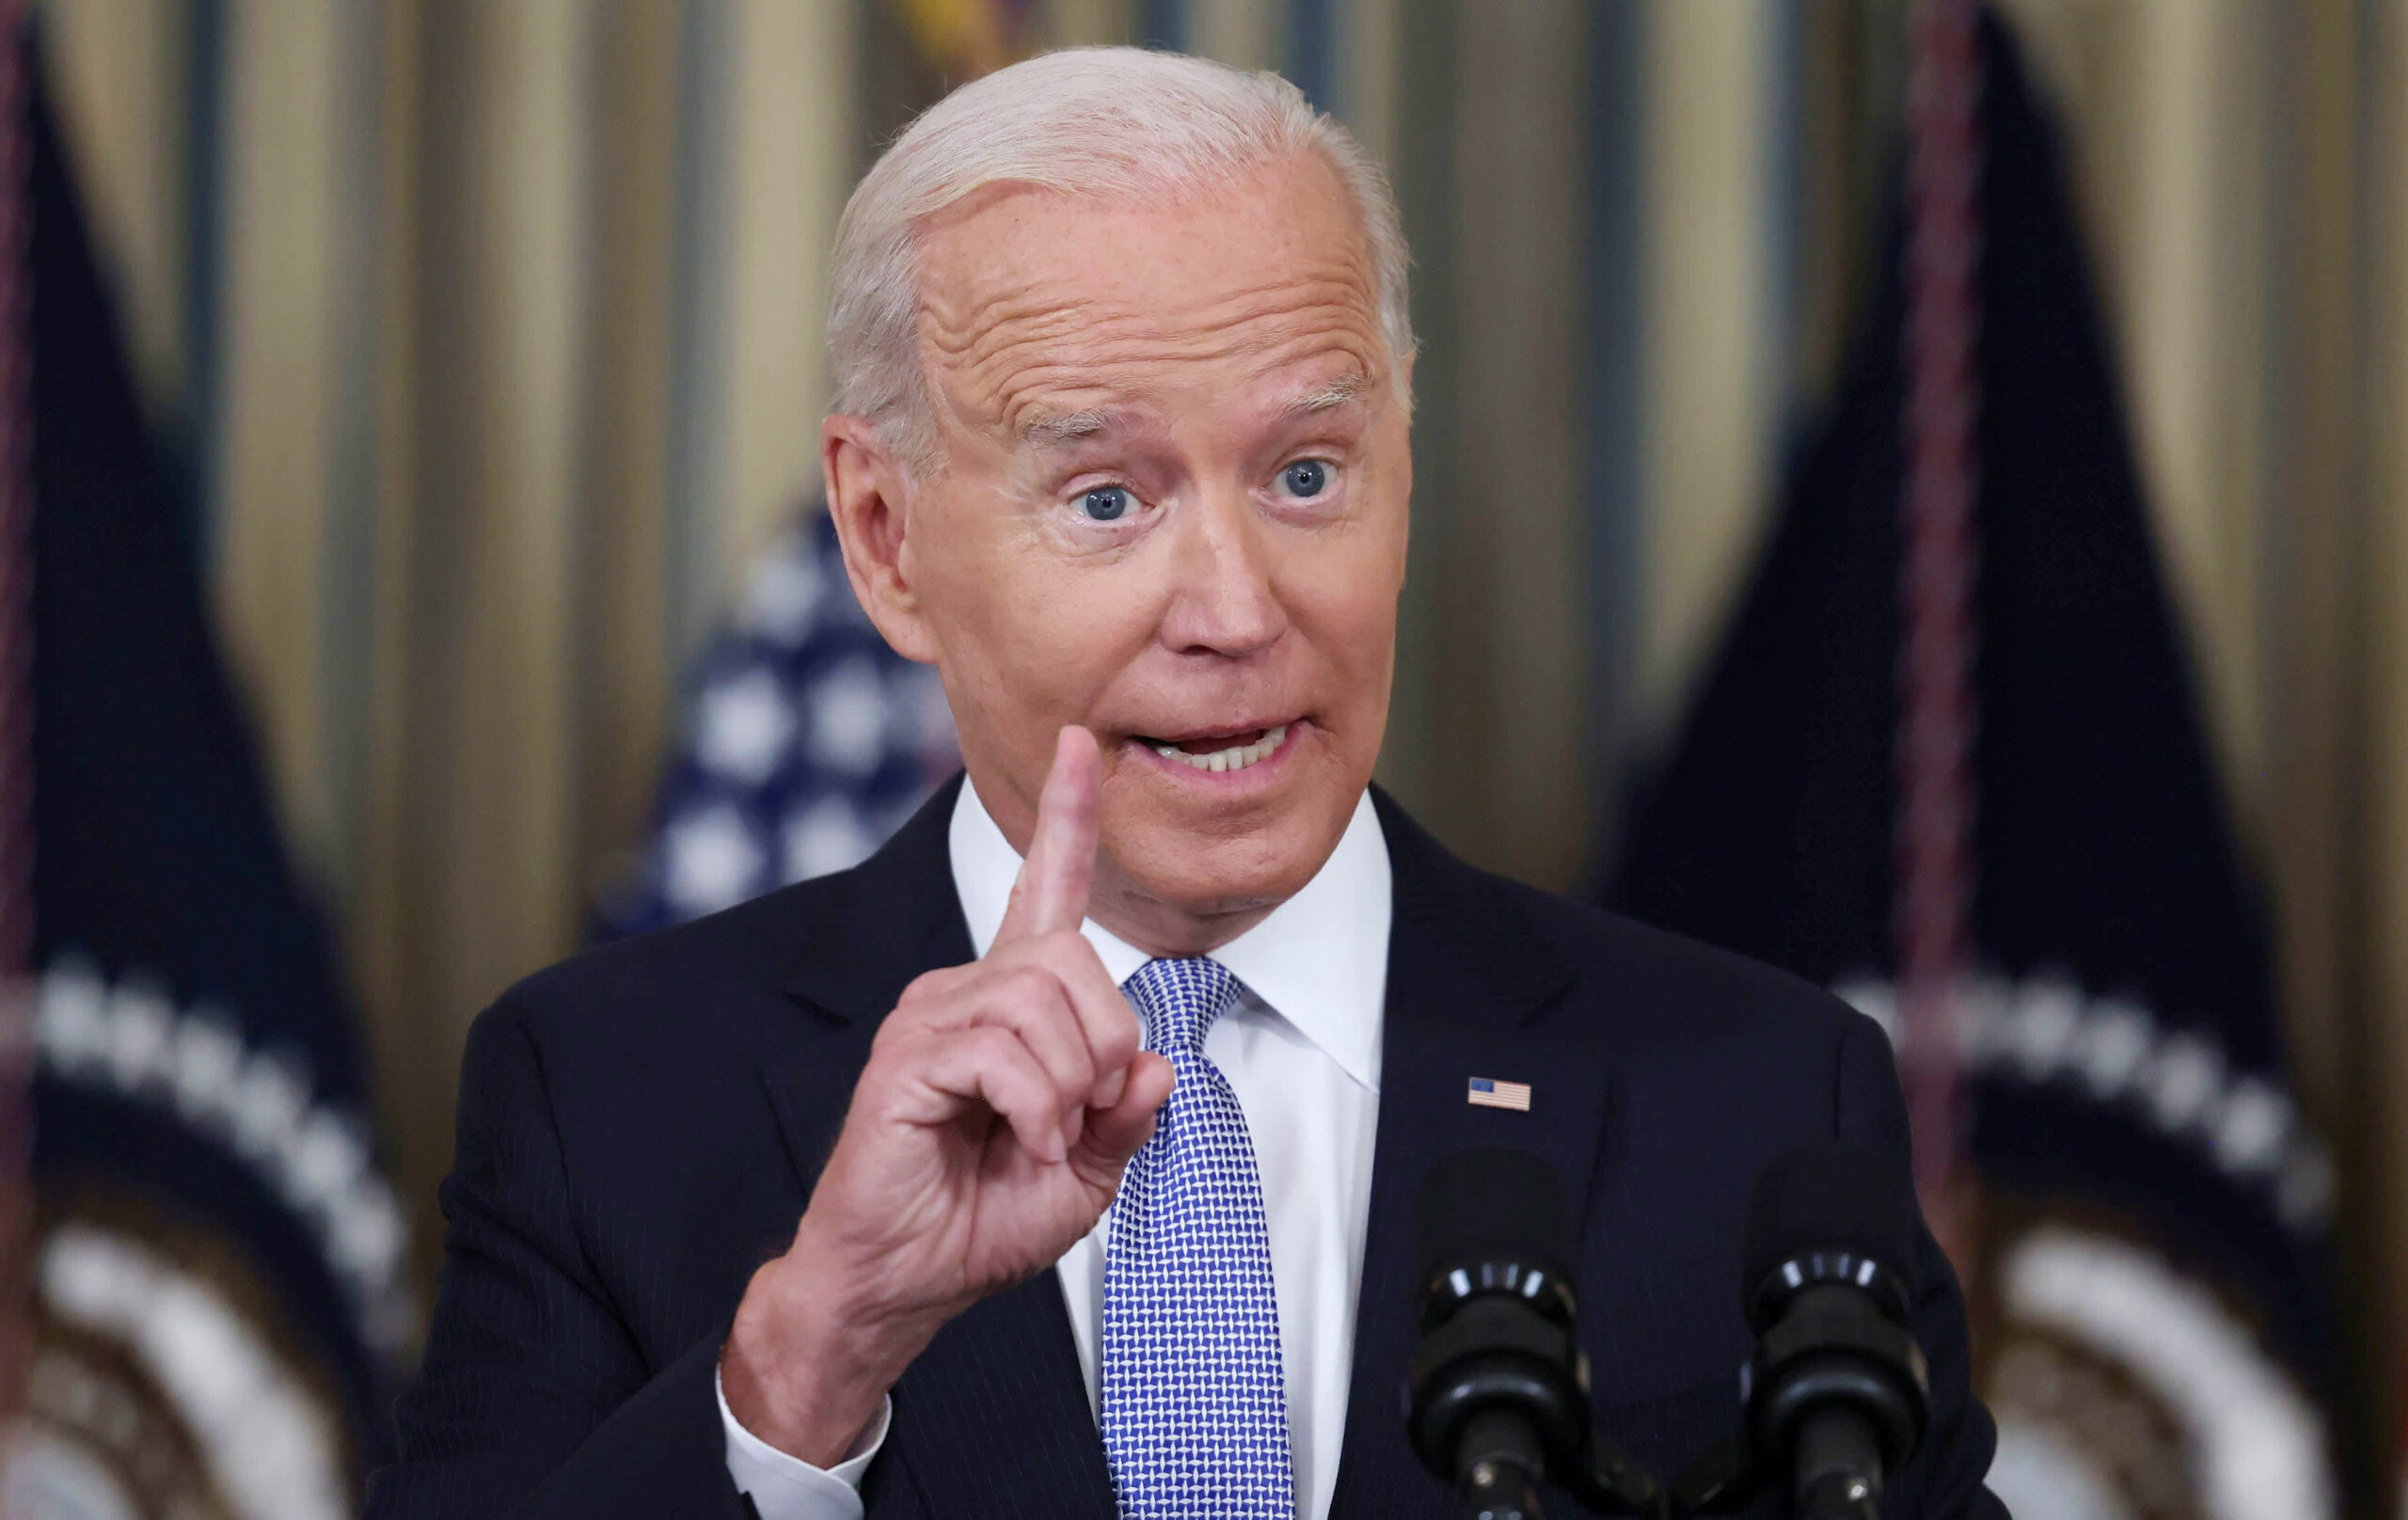 Biden says unvaccinated Americans are ‘costing all of us’ as he presses Covid vaccine mandates